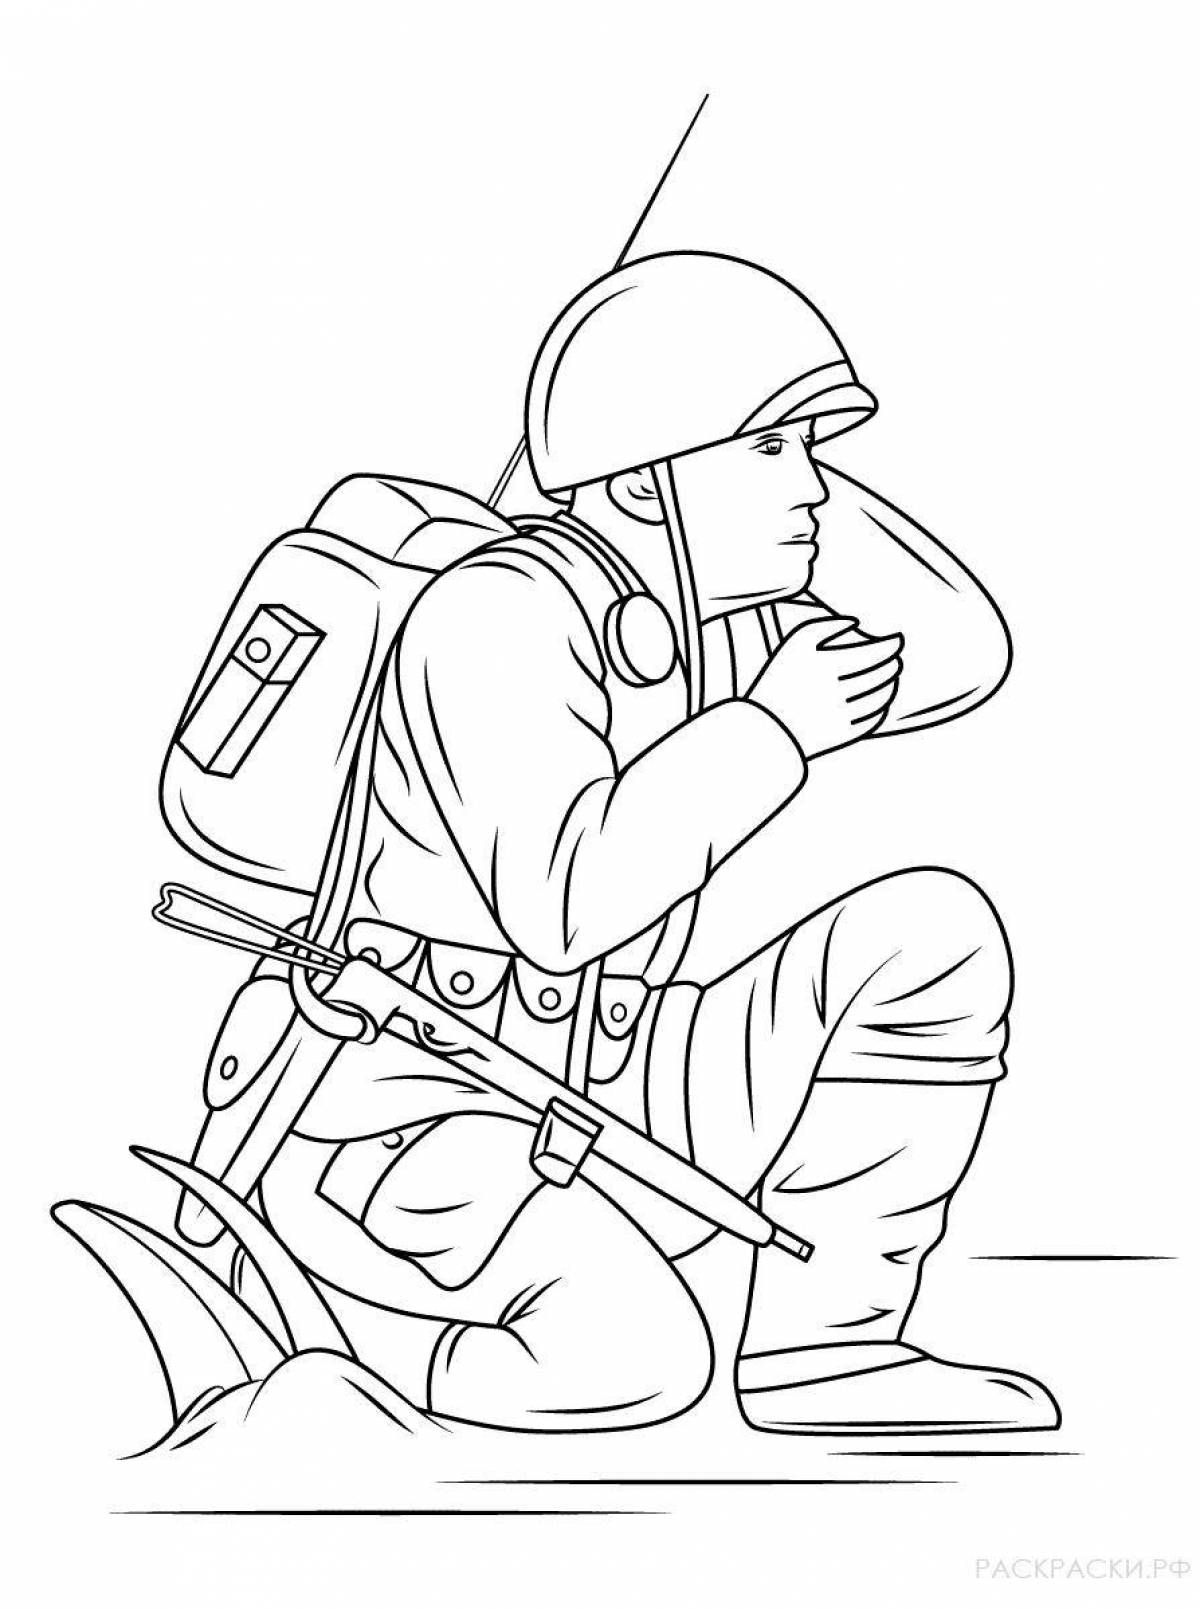 Russian army coloring book for preschoolers